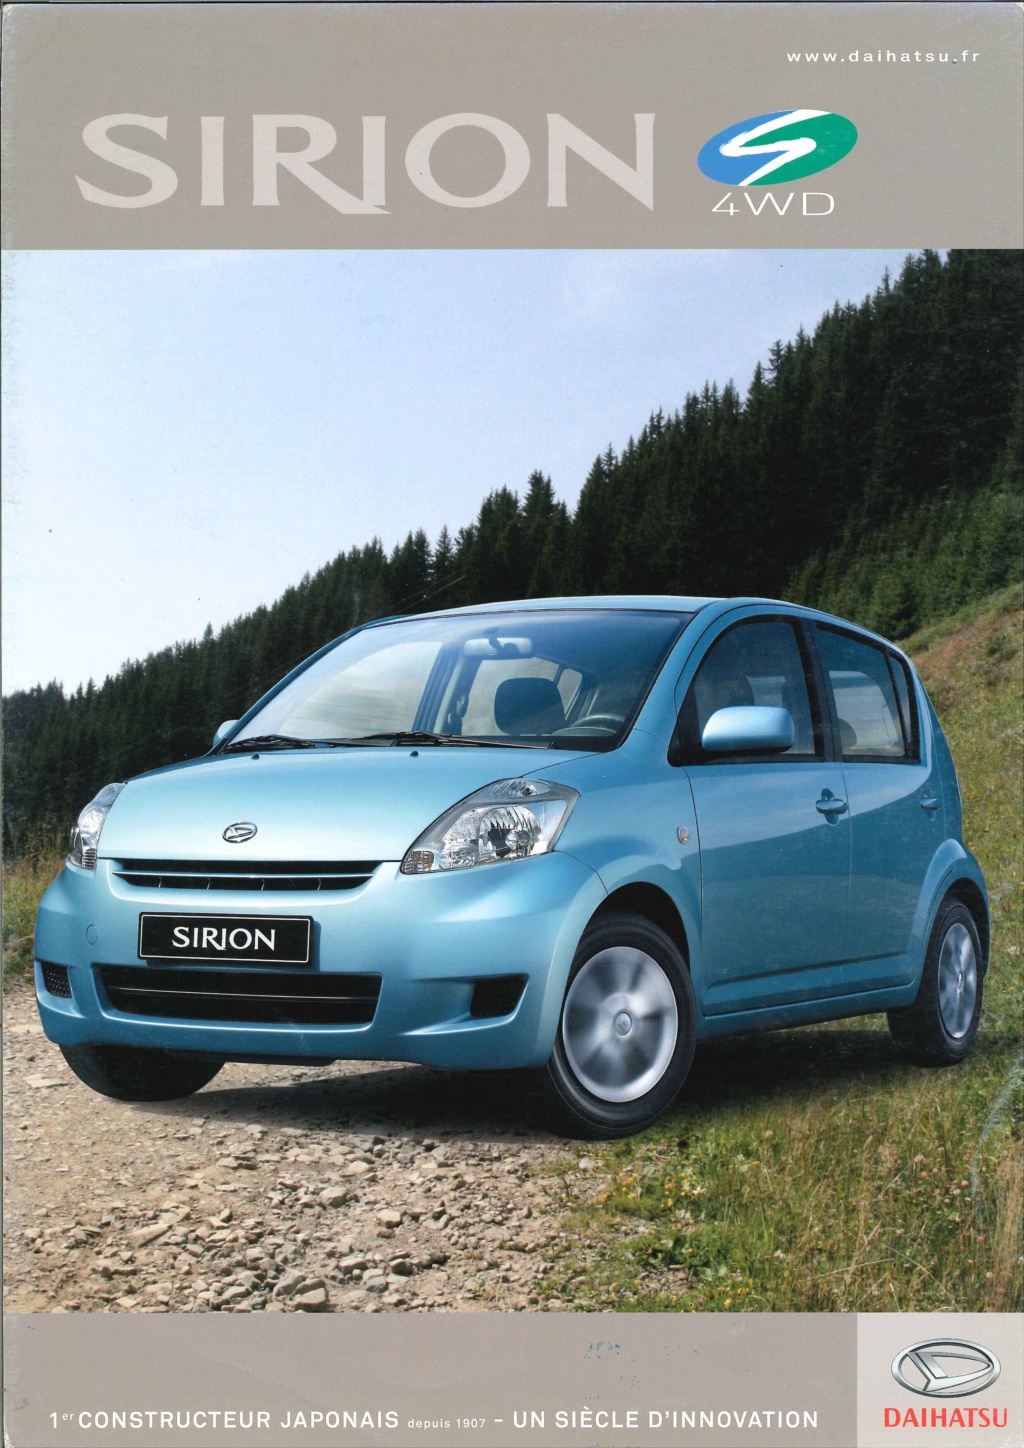 Documentation commerciale Sirion 2004-2013 20191111